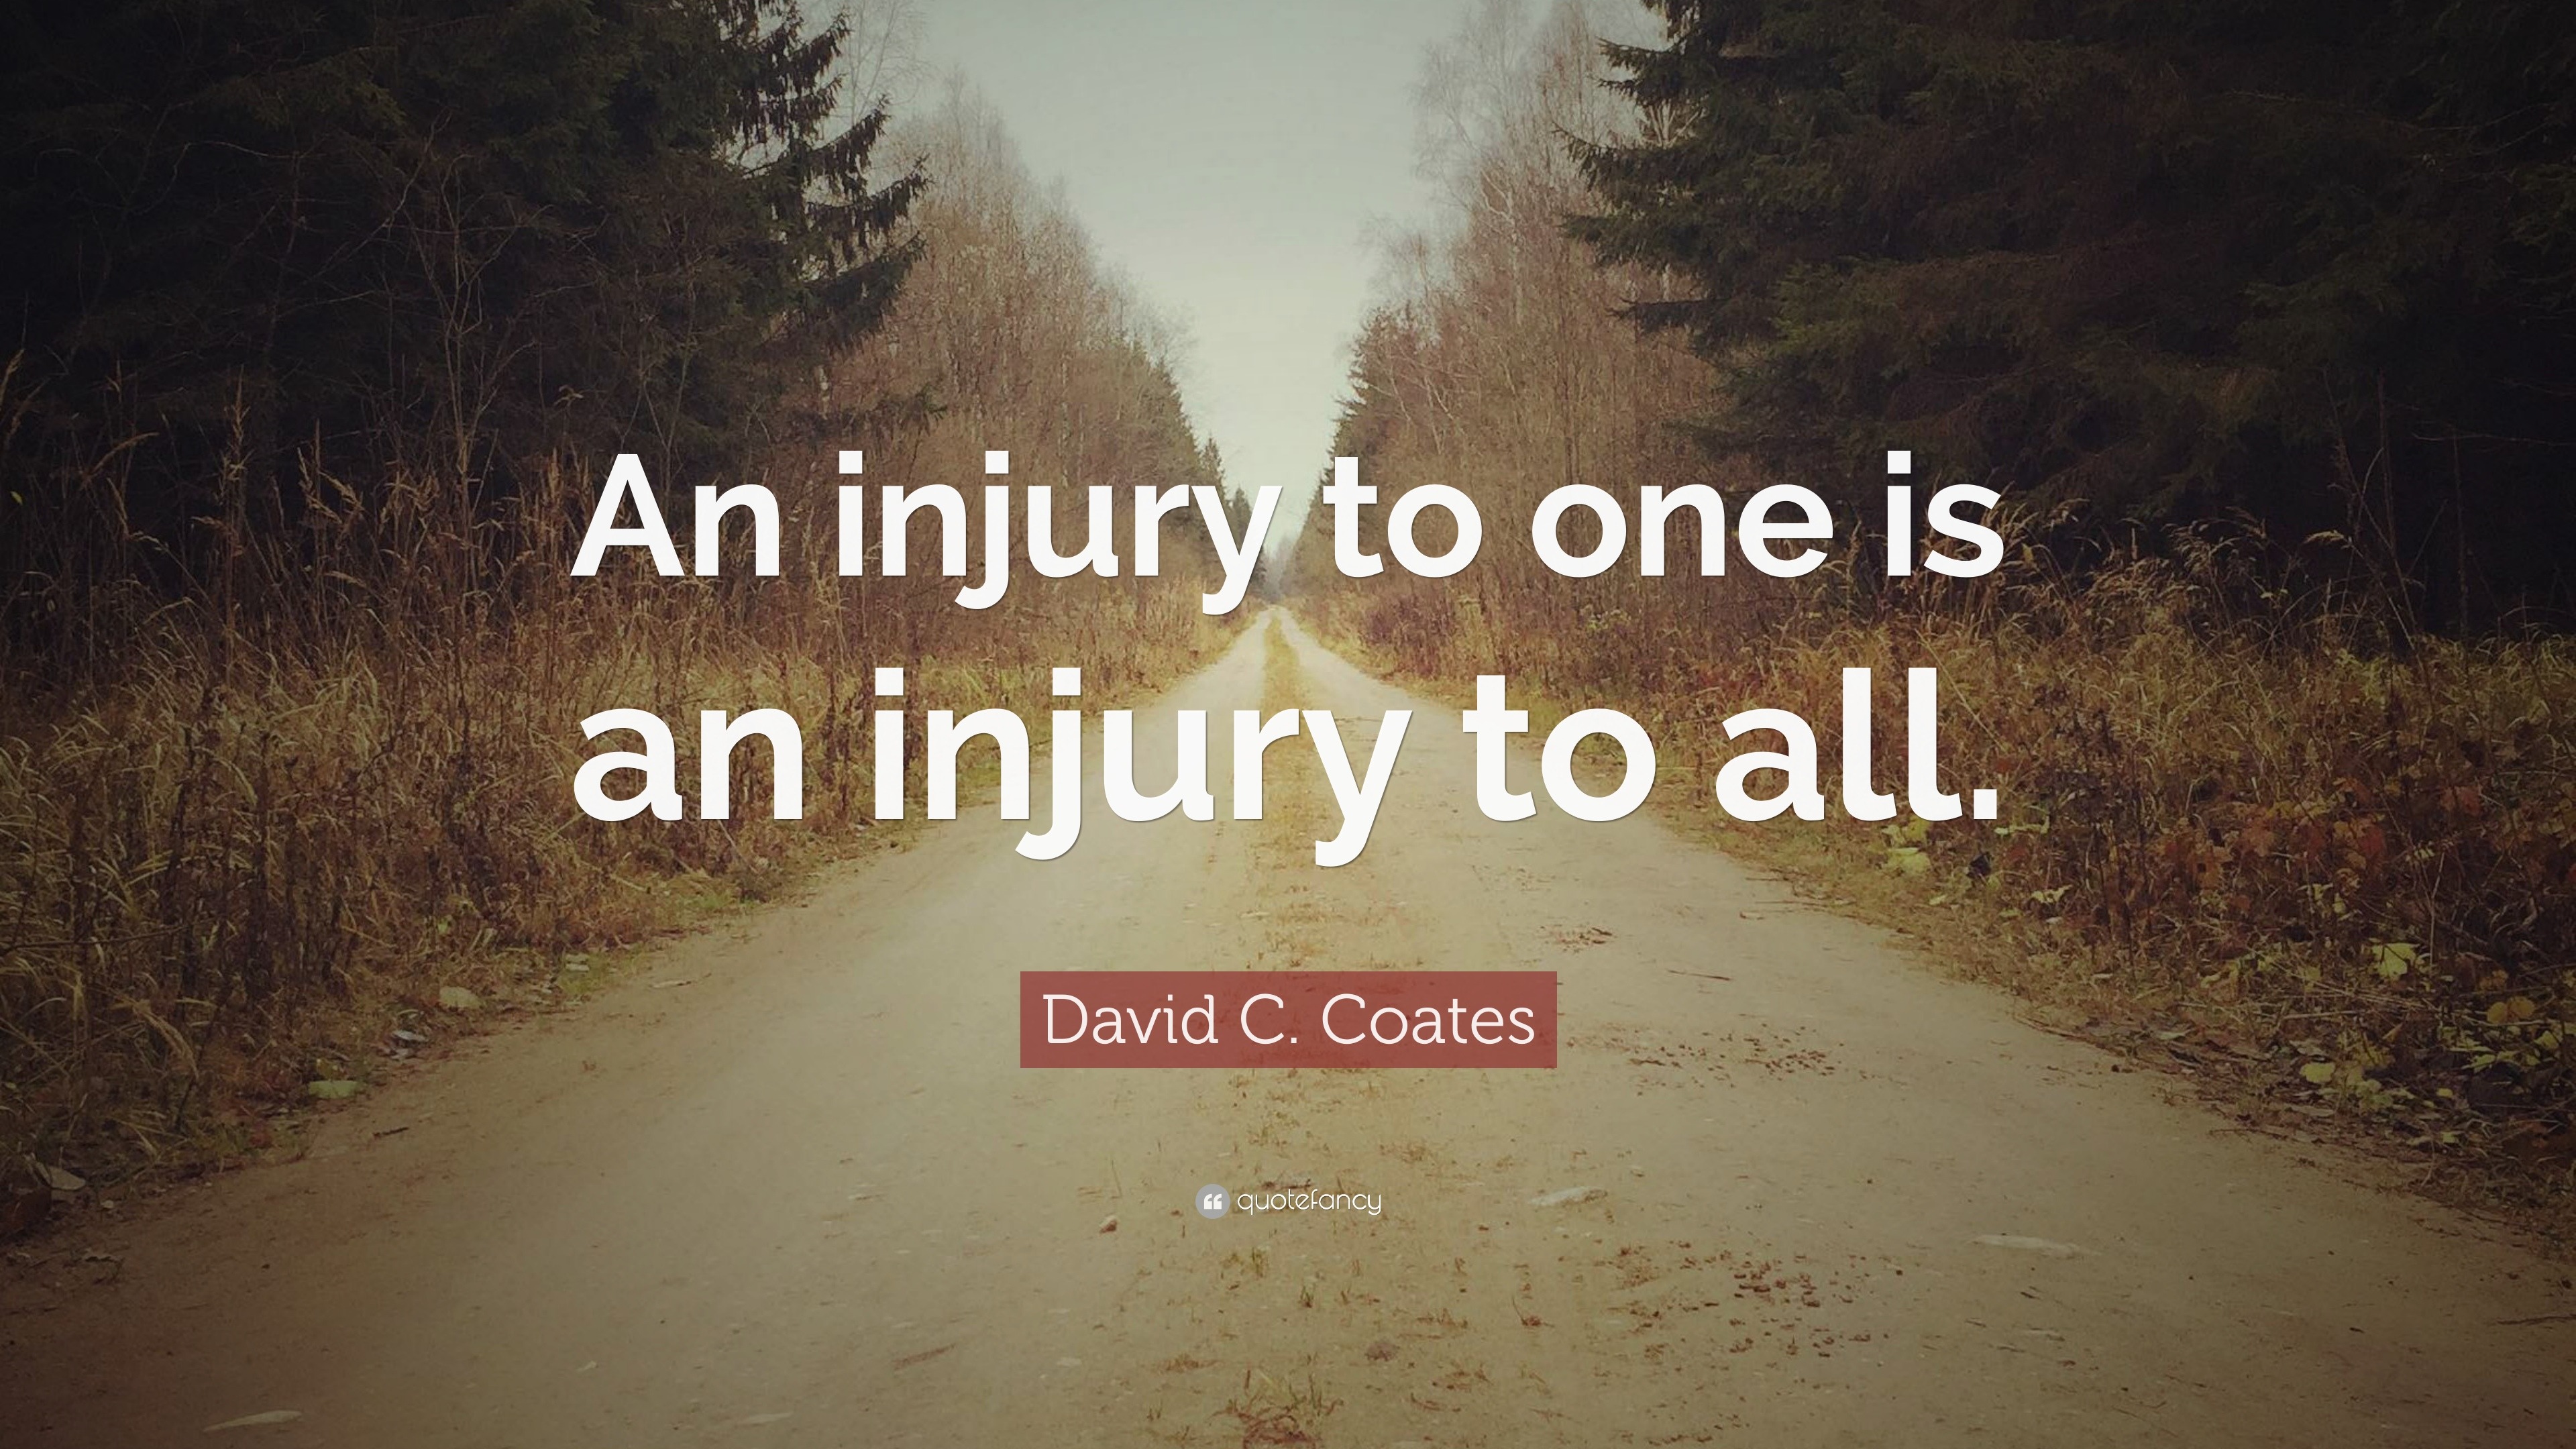 David C. Coates Quote: “An injury to one is an injury to all.”